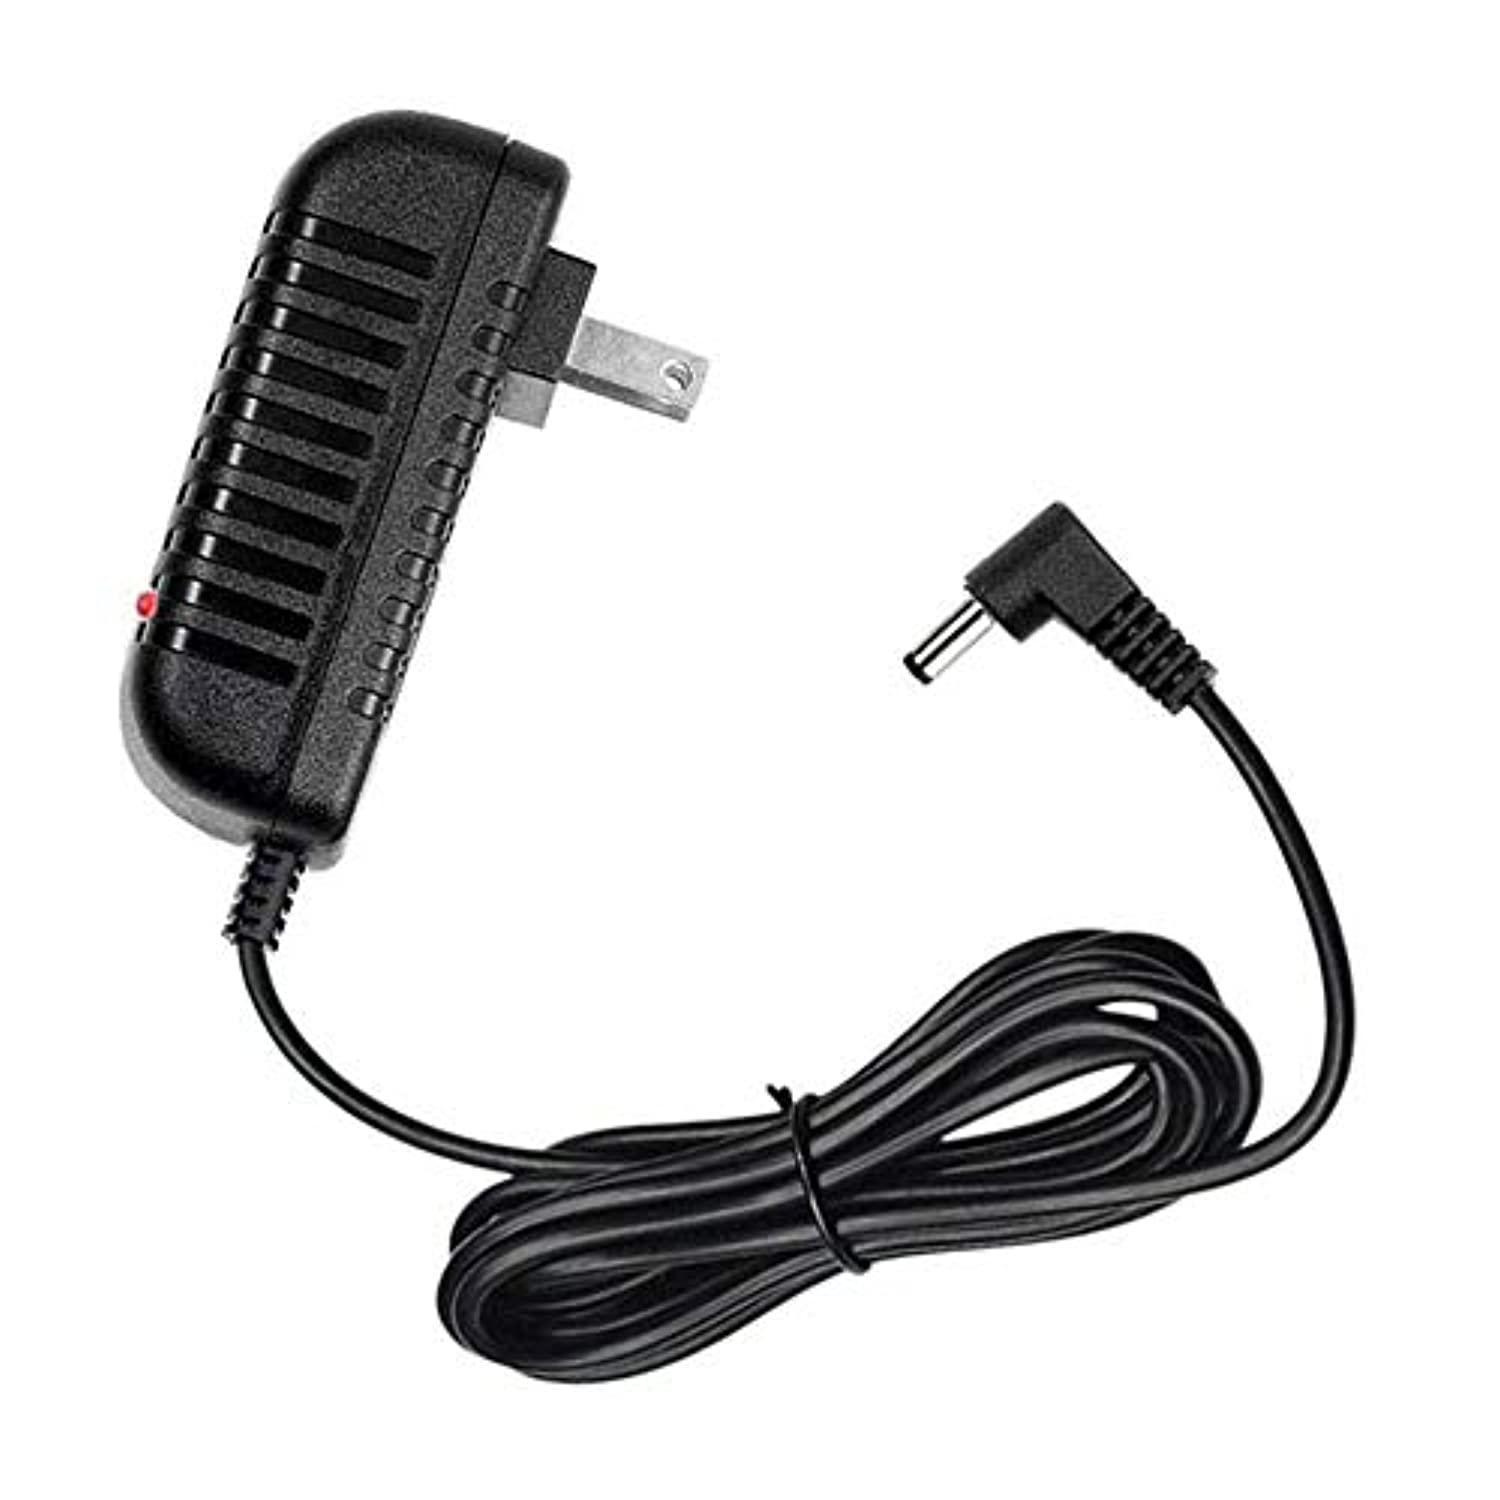 powe-tech ac-dc adapter charger for grandstream bt-102 bt102 voip phone power supply psu, 5 feet, with led indicator